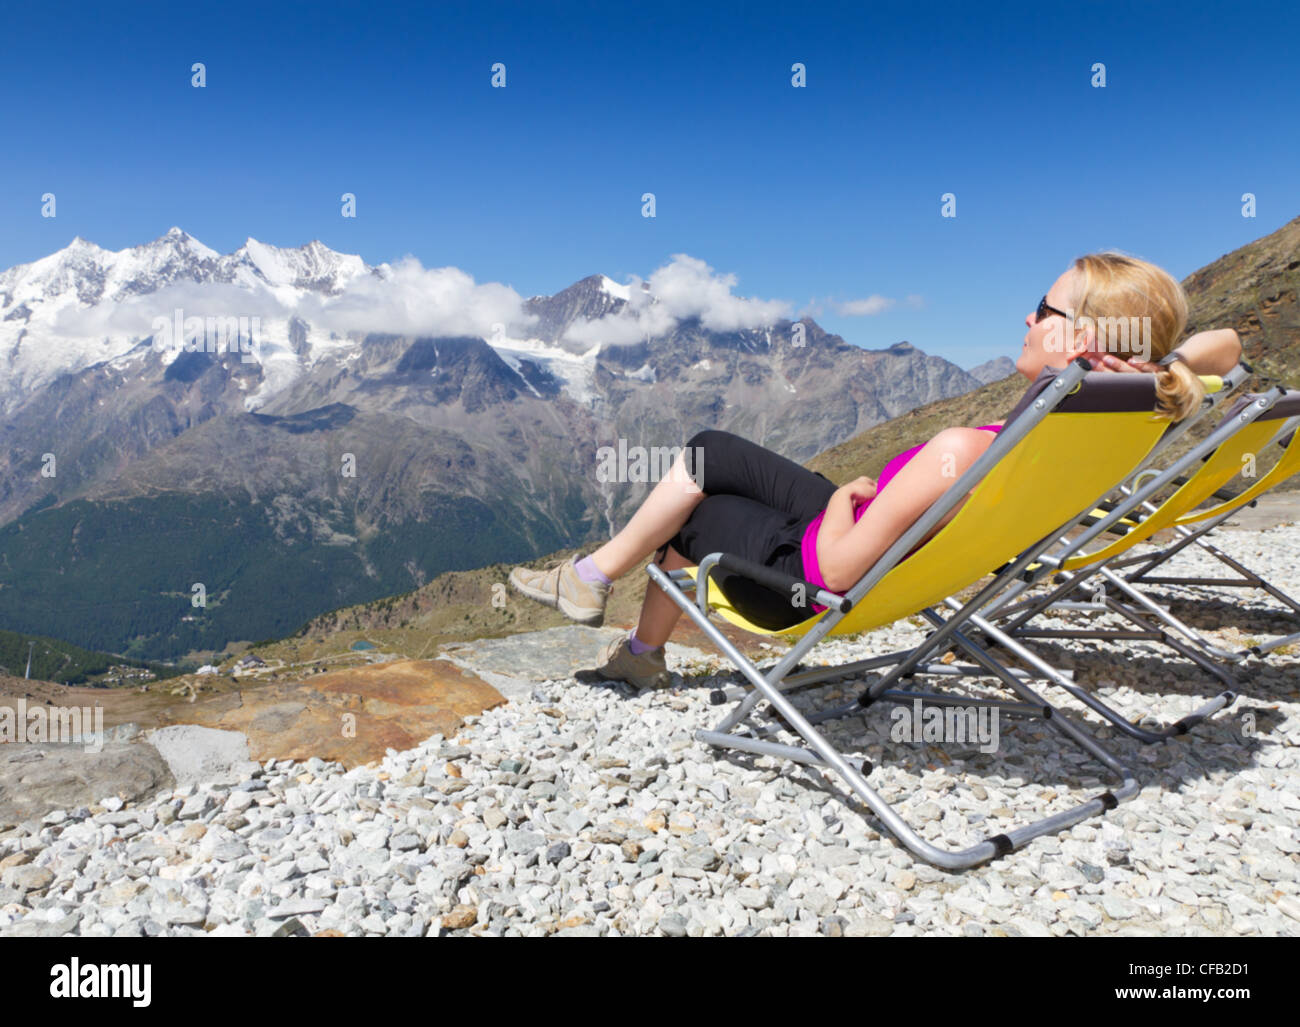 young woman enjoys the sun and relaxes on a canvas chair surrounded by alpine snow capped mountains Saas Fee, Switzerland Stock Photo